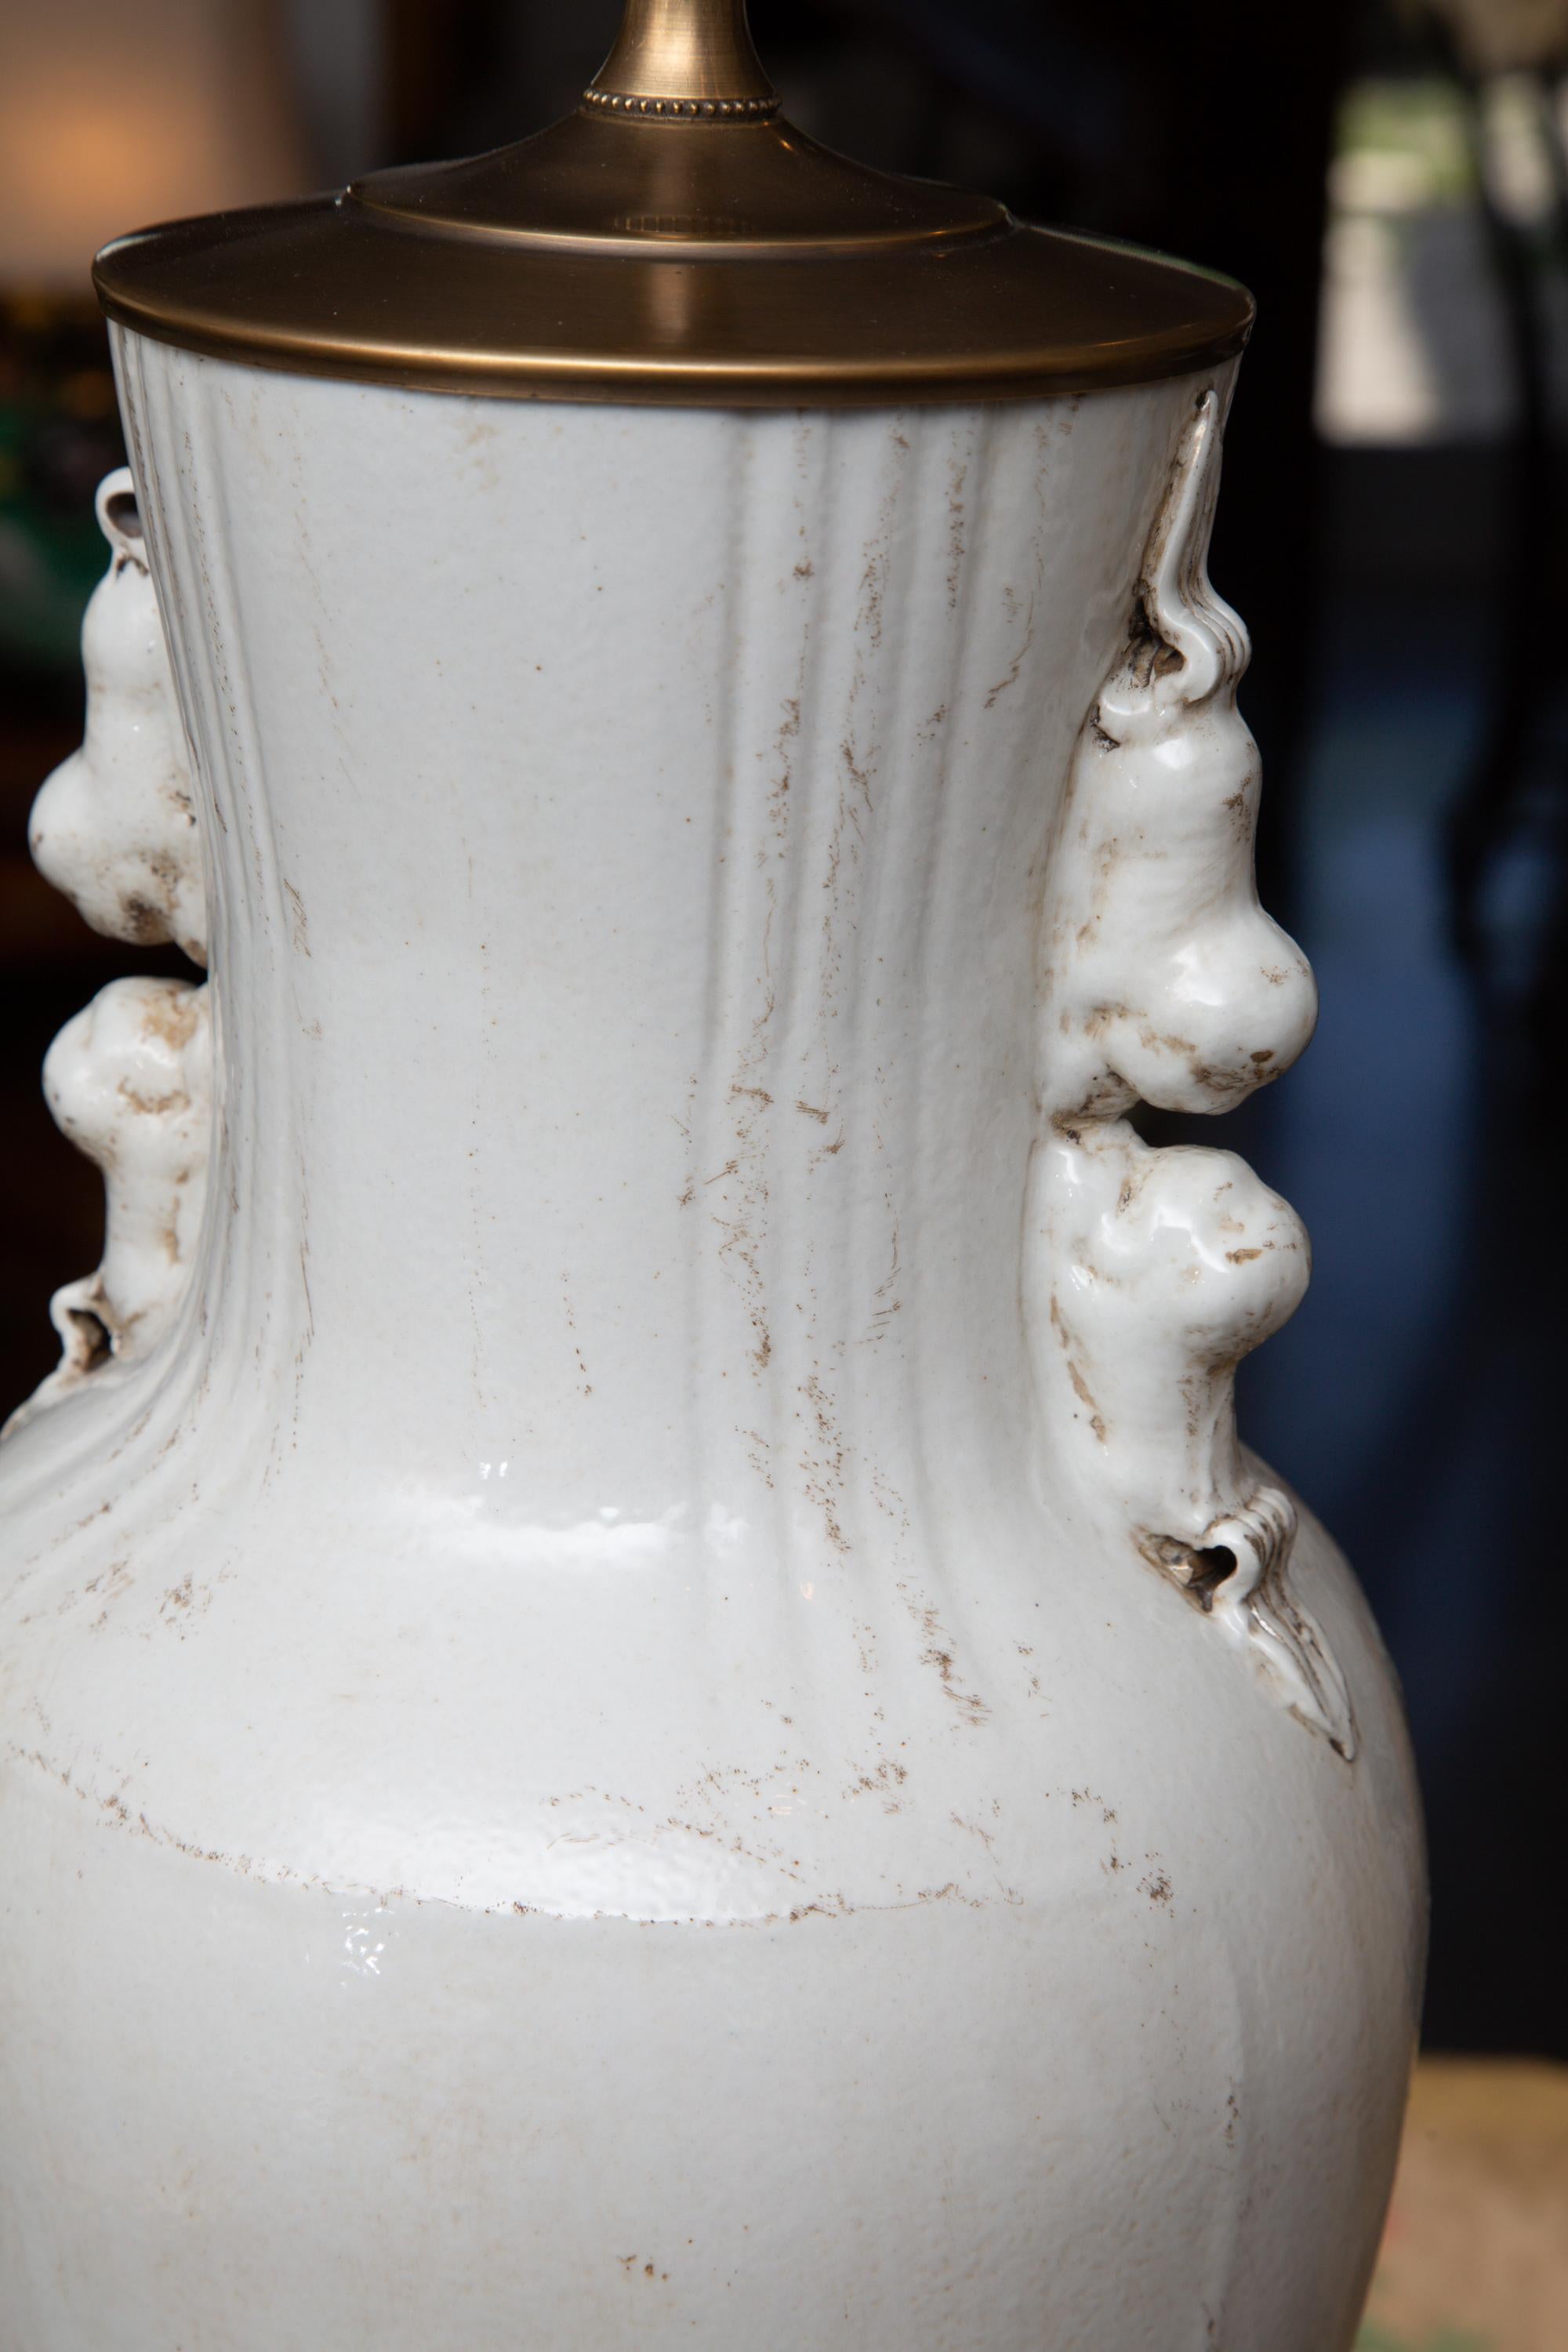 Clay White Glazed Chinese Ceramic Lamp - Pair available